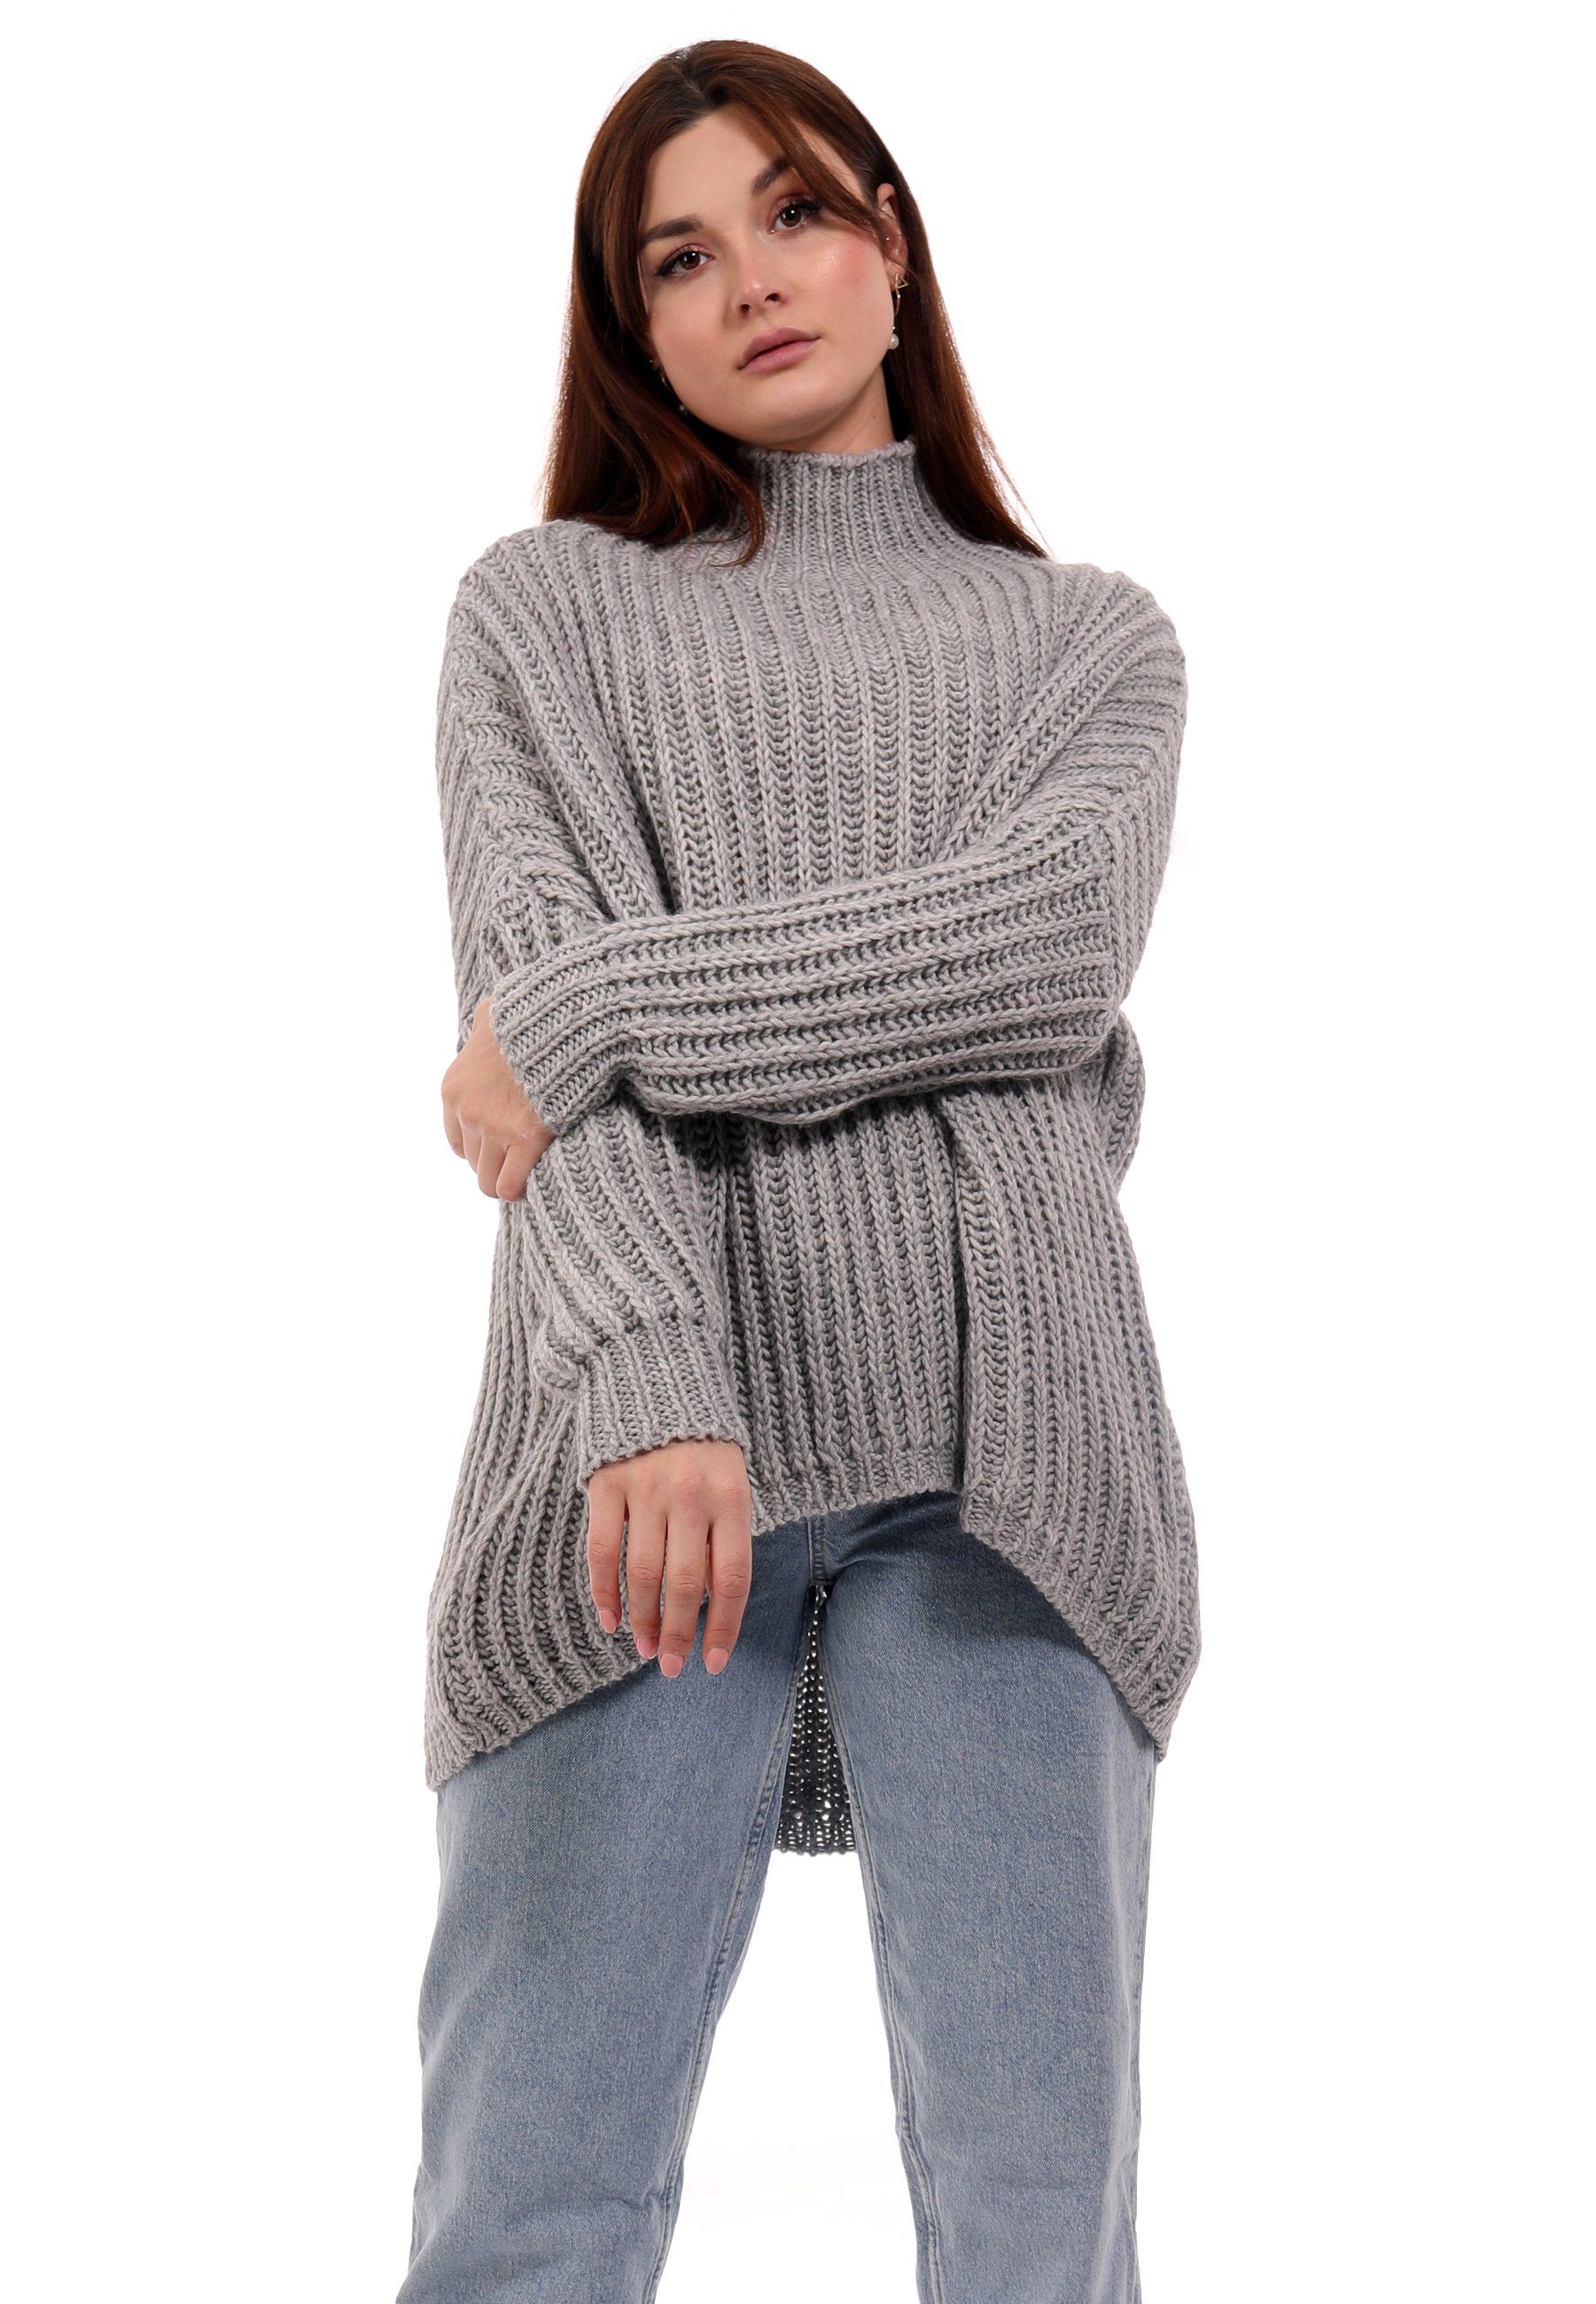 YC Fashion & Style Longpullover Oversized Pullover Grobstrick Vokuhila Sweater One Size (1-tlg) casual grau